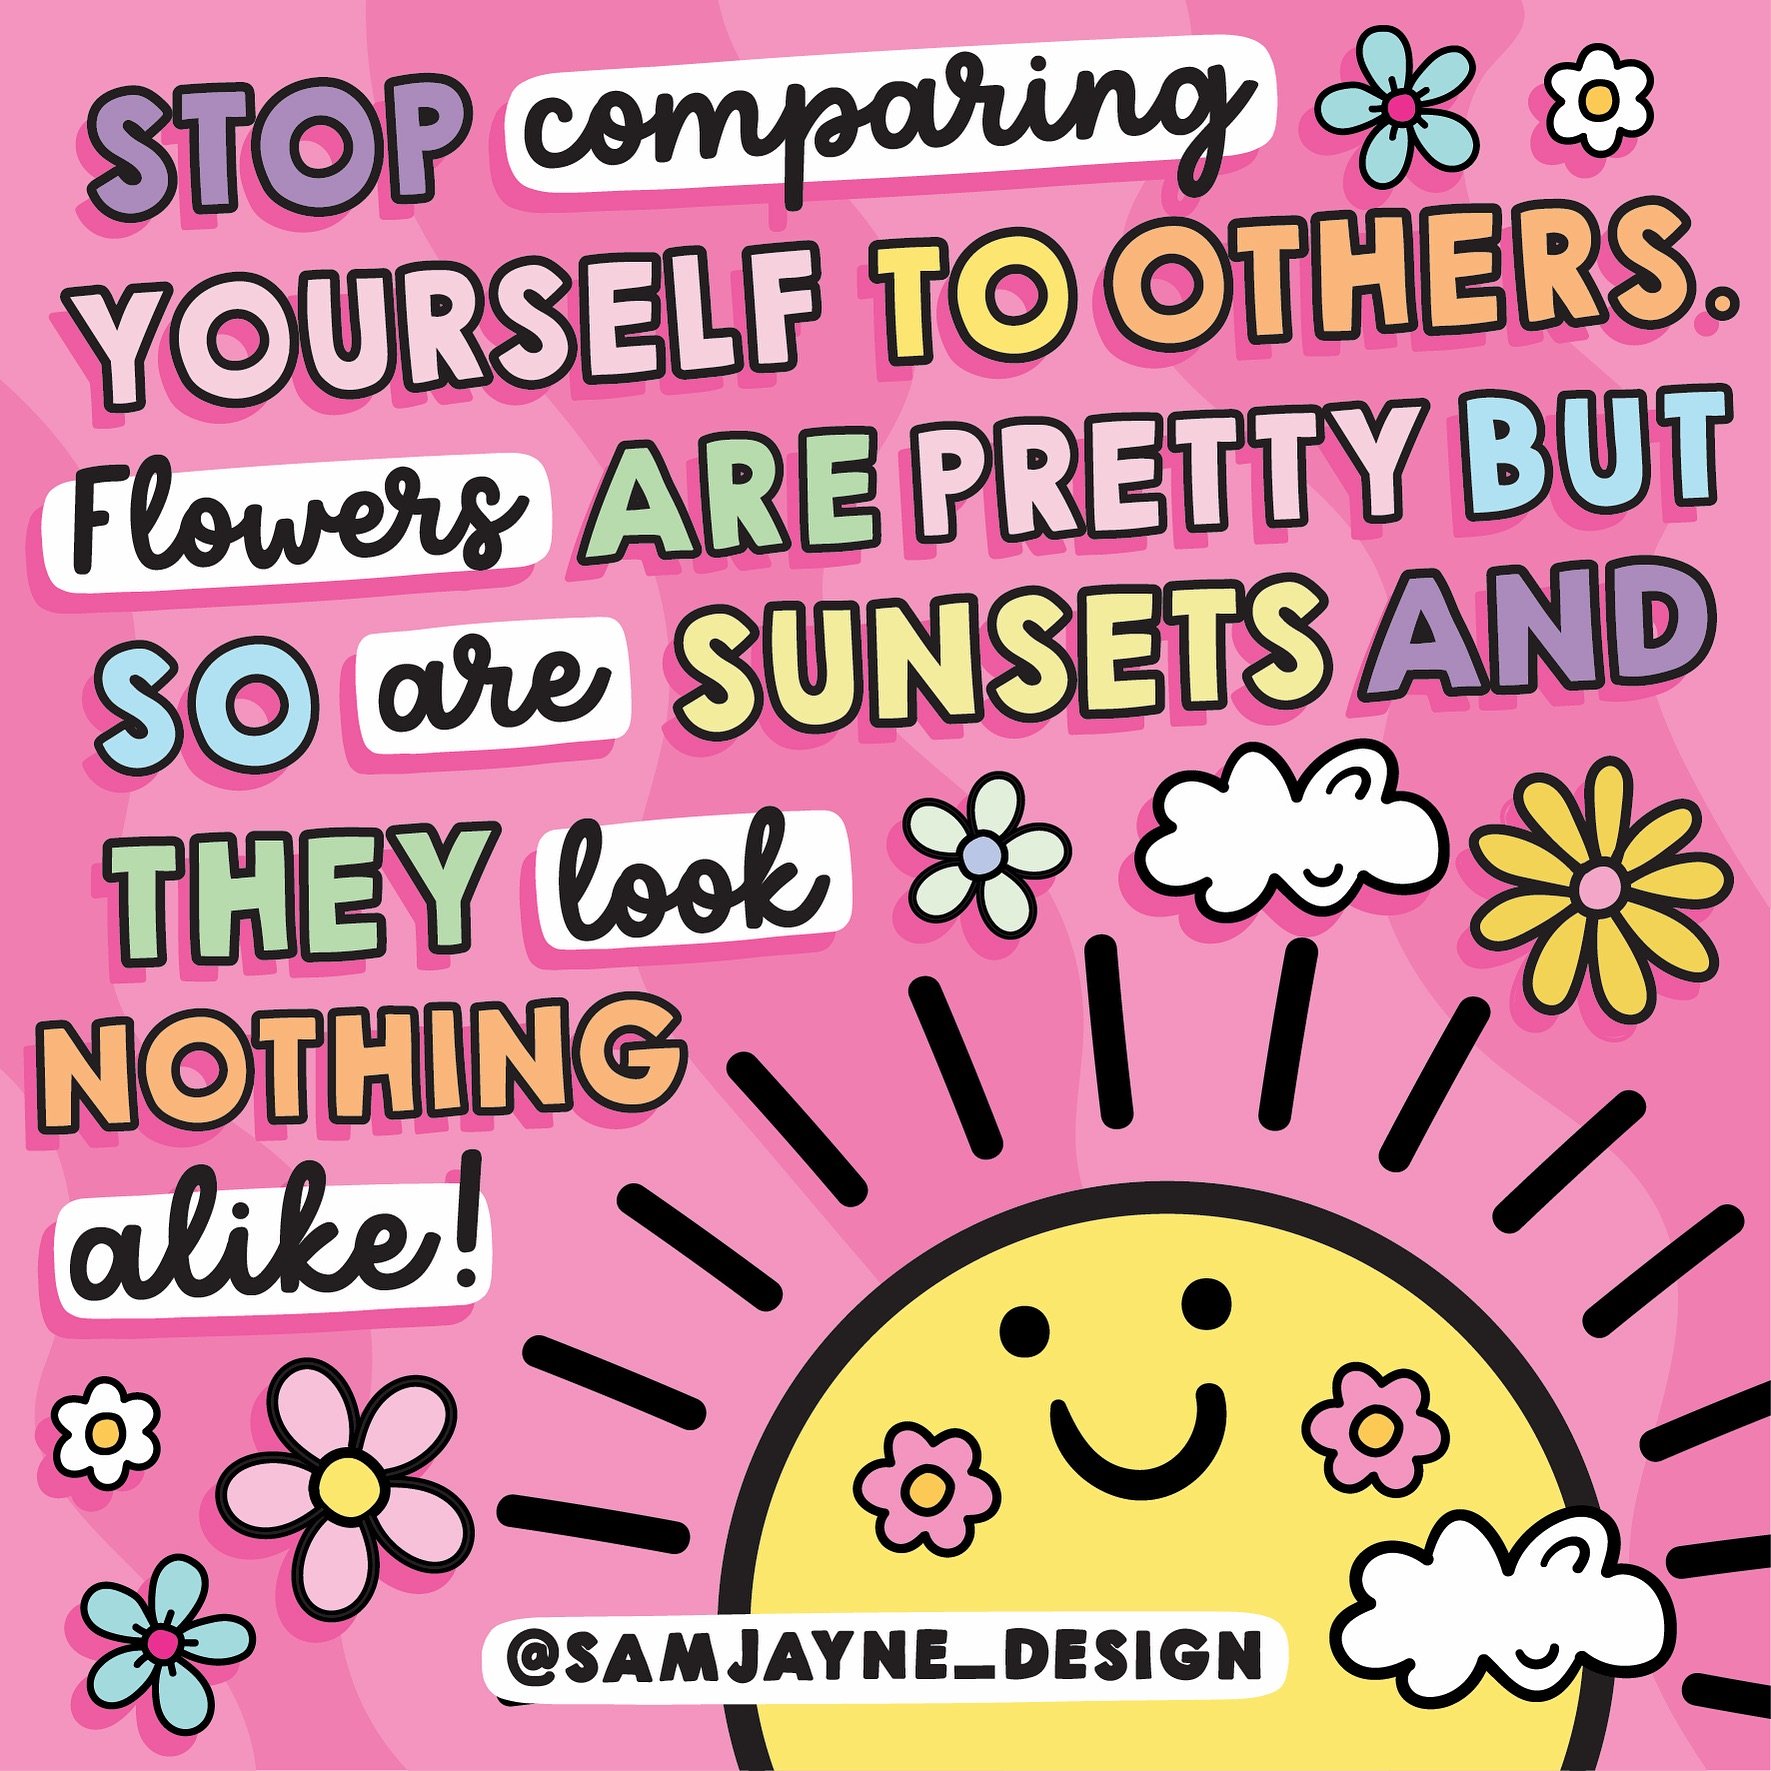 It&rsquo;s boring being like everybody else 😊
Double tap ❤️ and tag someone who needs to hear this👇🏼💖

#cuteartwork #groovyart #cuteartstyle #brightcolours #goodvibes #handlettering #motivationalart #digitalart #feelgoodart #adobecreative #dailyr